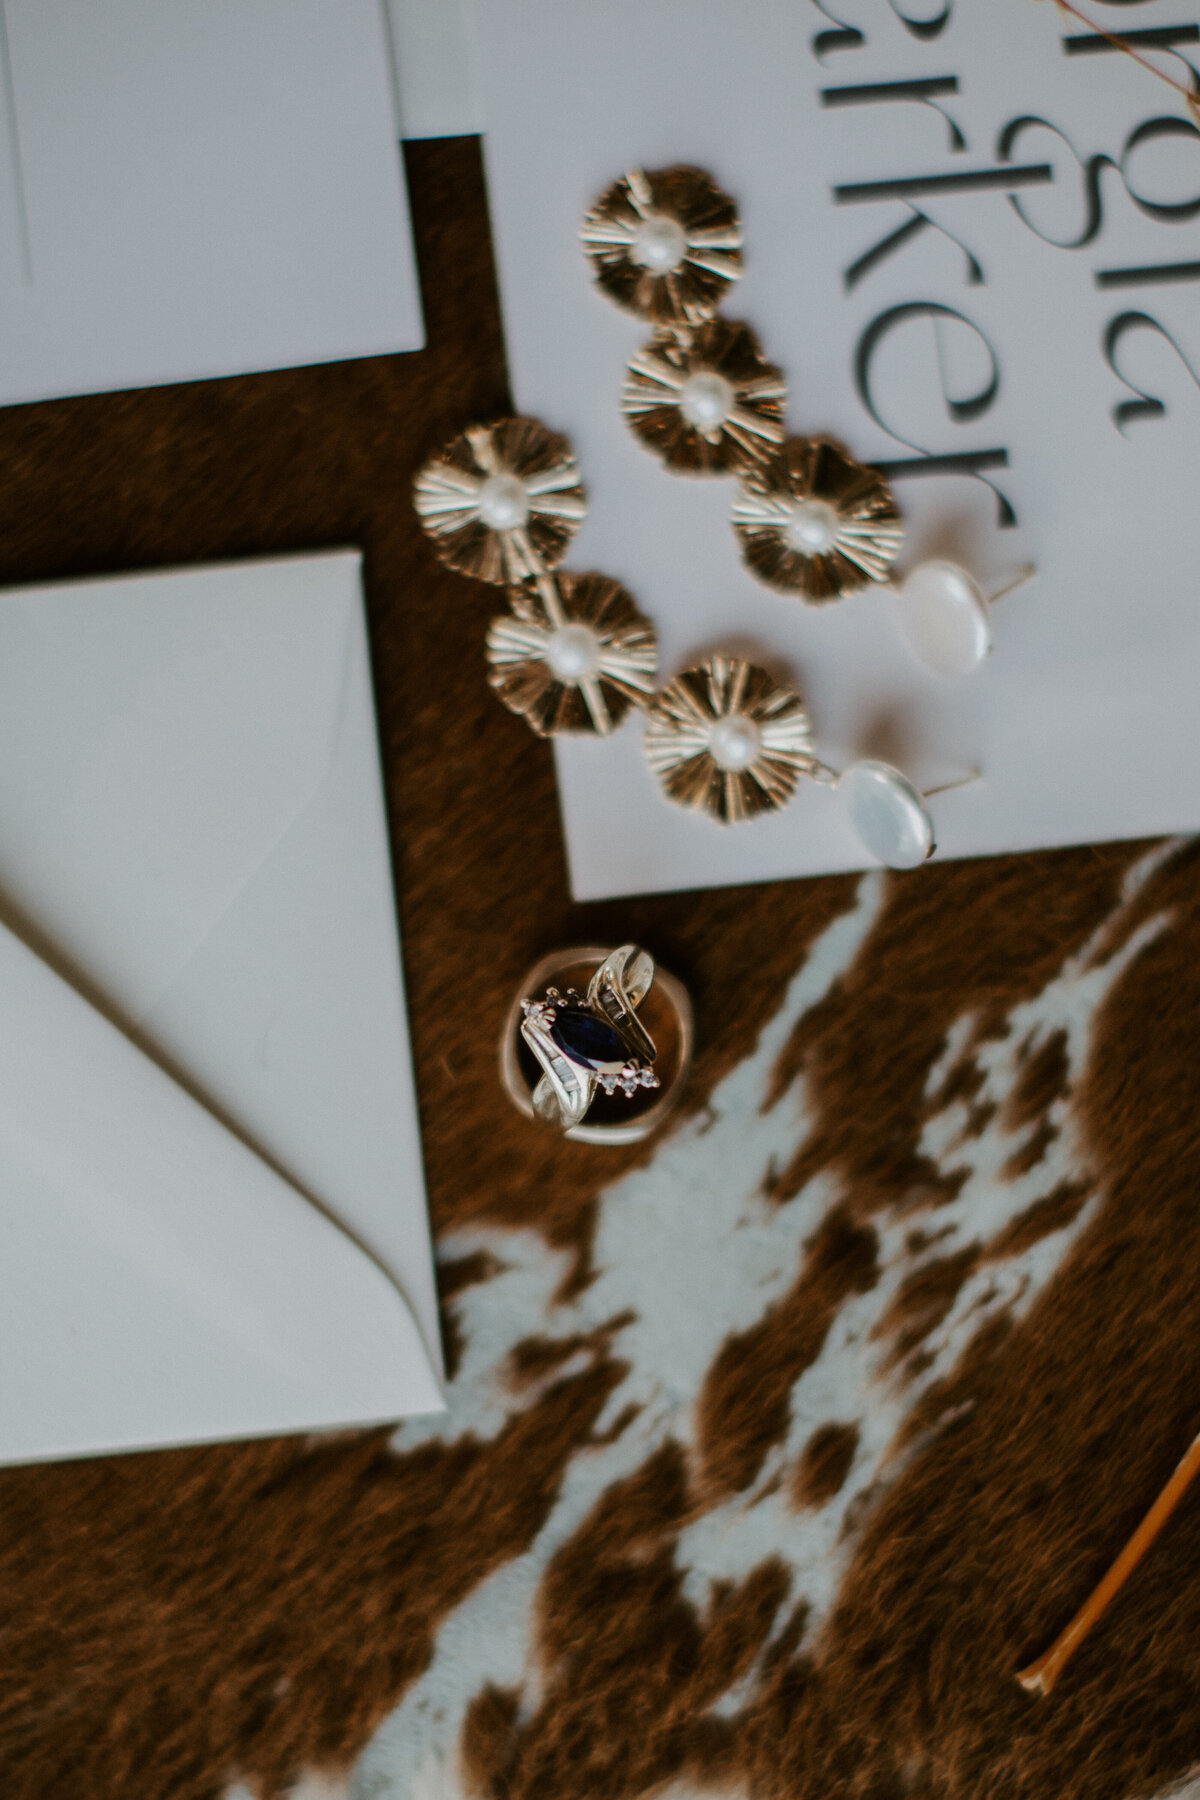 A pair of earrings and wedding bands atop various white wedding stationery with black font on cow hide.